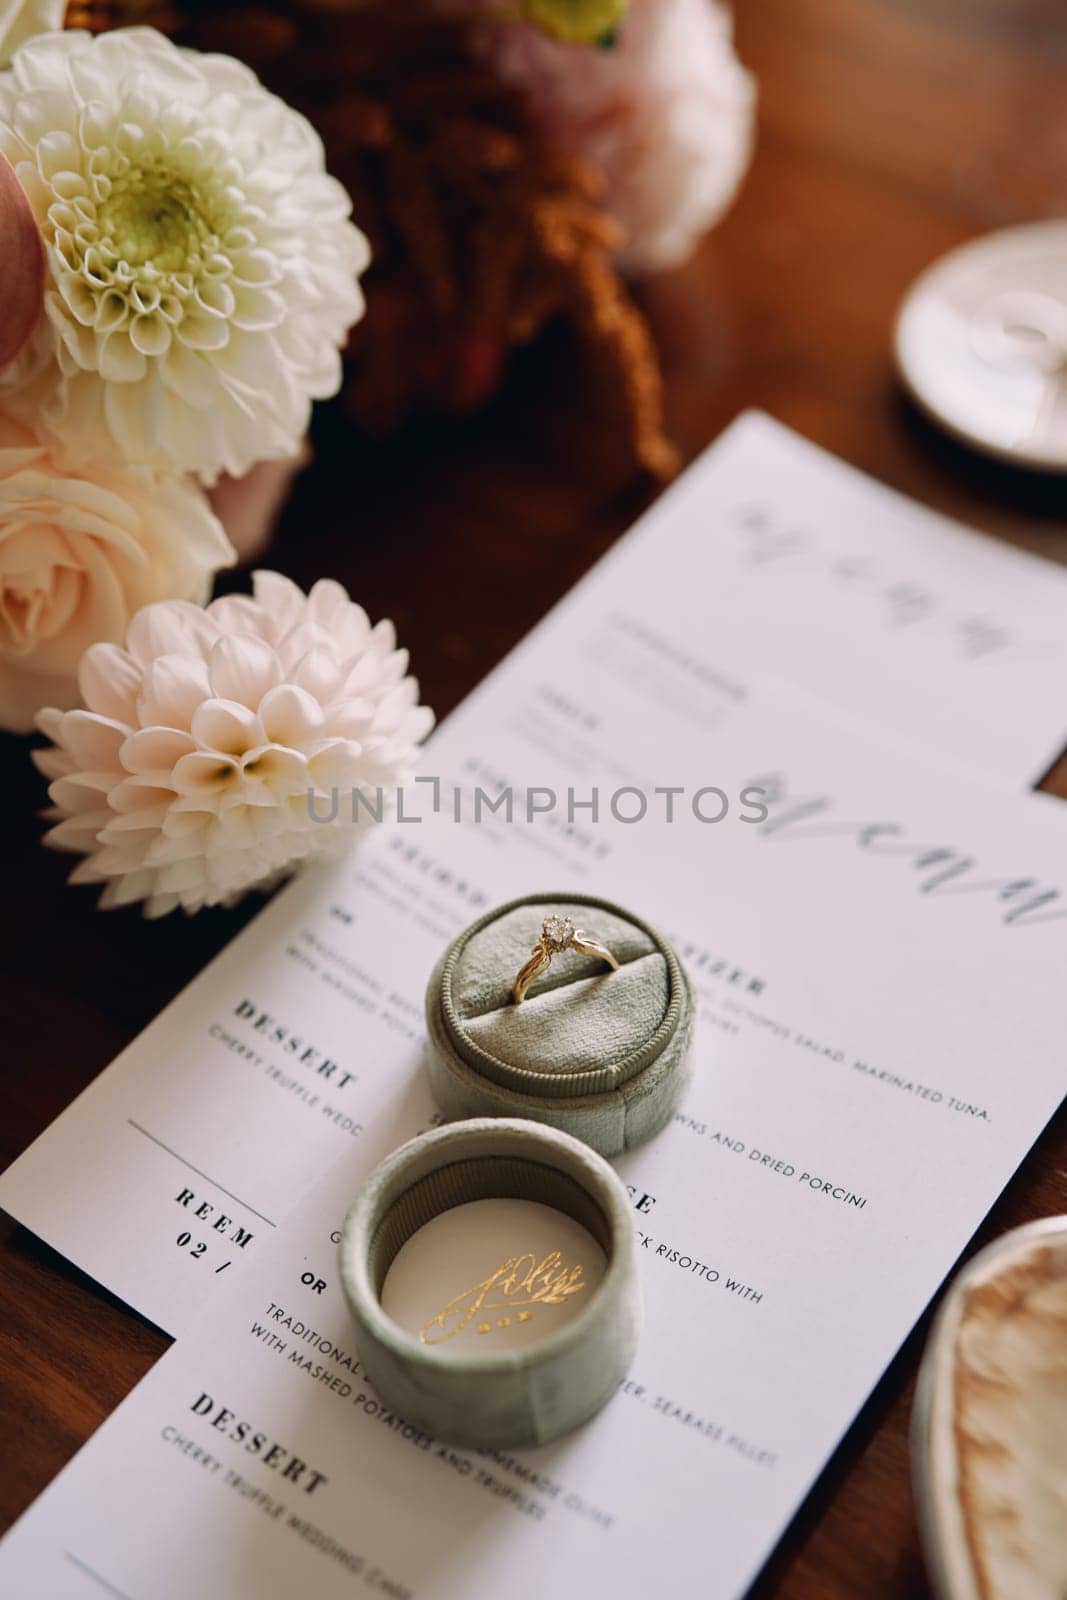 Engagement ring in a box lies on a holiday menu near flowers by Nadtochiy